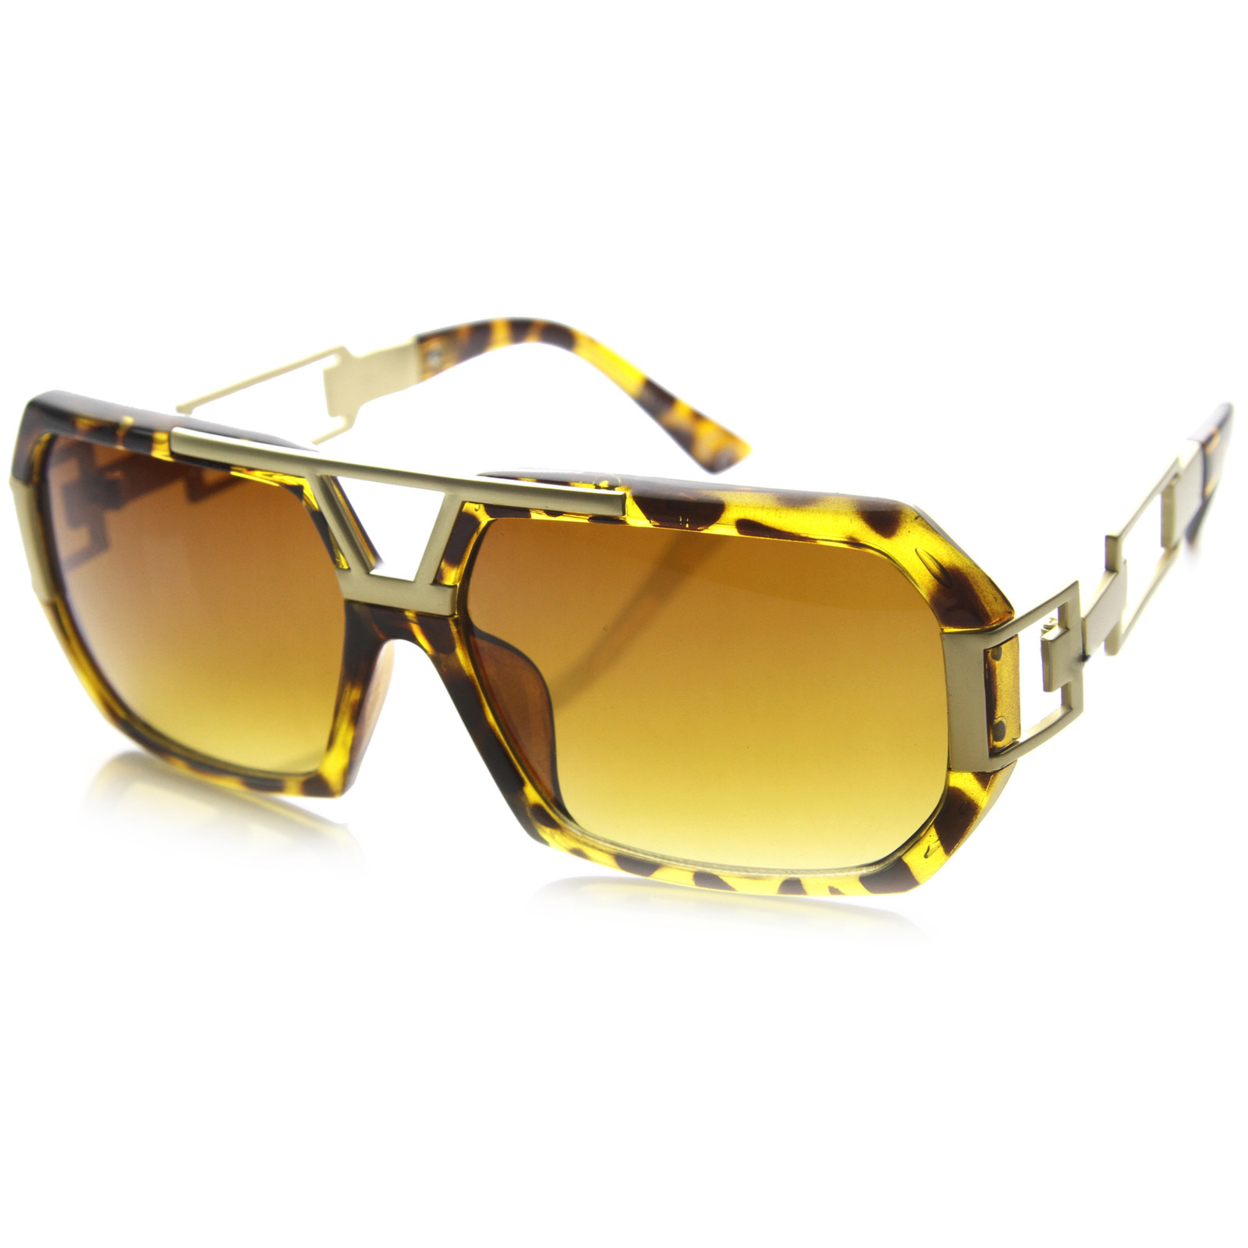 Large Fashion Square Urban Spec Style Sunglasses With Die Cut Metal Arms 9755 - Shiny-Tortoise Amber